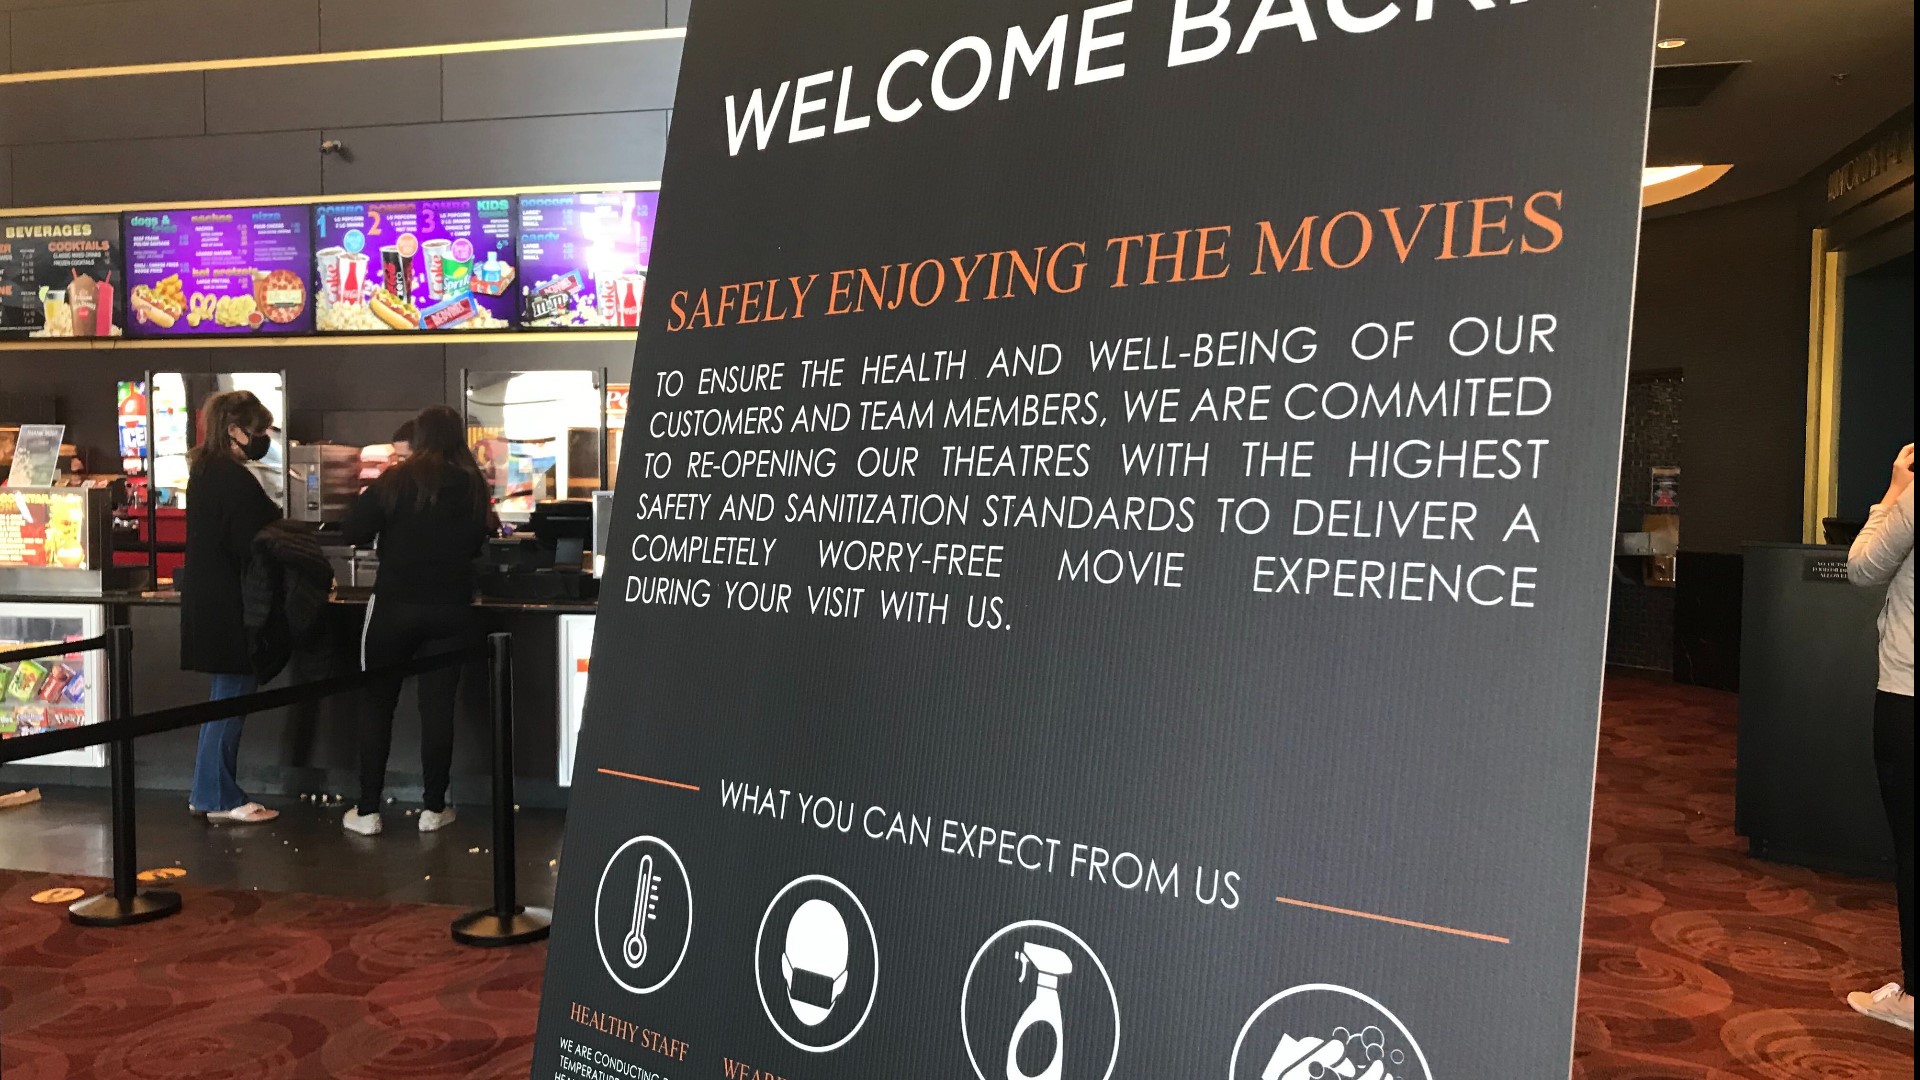 Woodland State Theatre & Multiplex reopening amid the pandemic is giving nearby restaurants hope they will be seeing hungry moviegoers stopping by for a bite to eat.